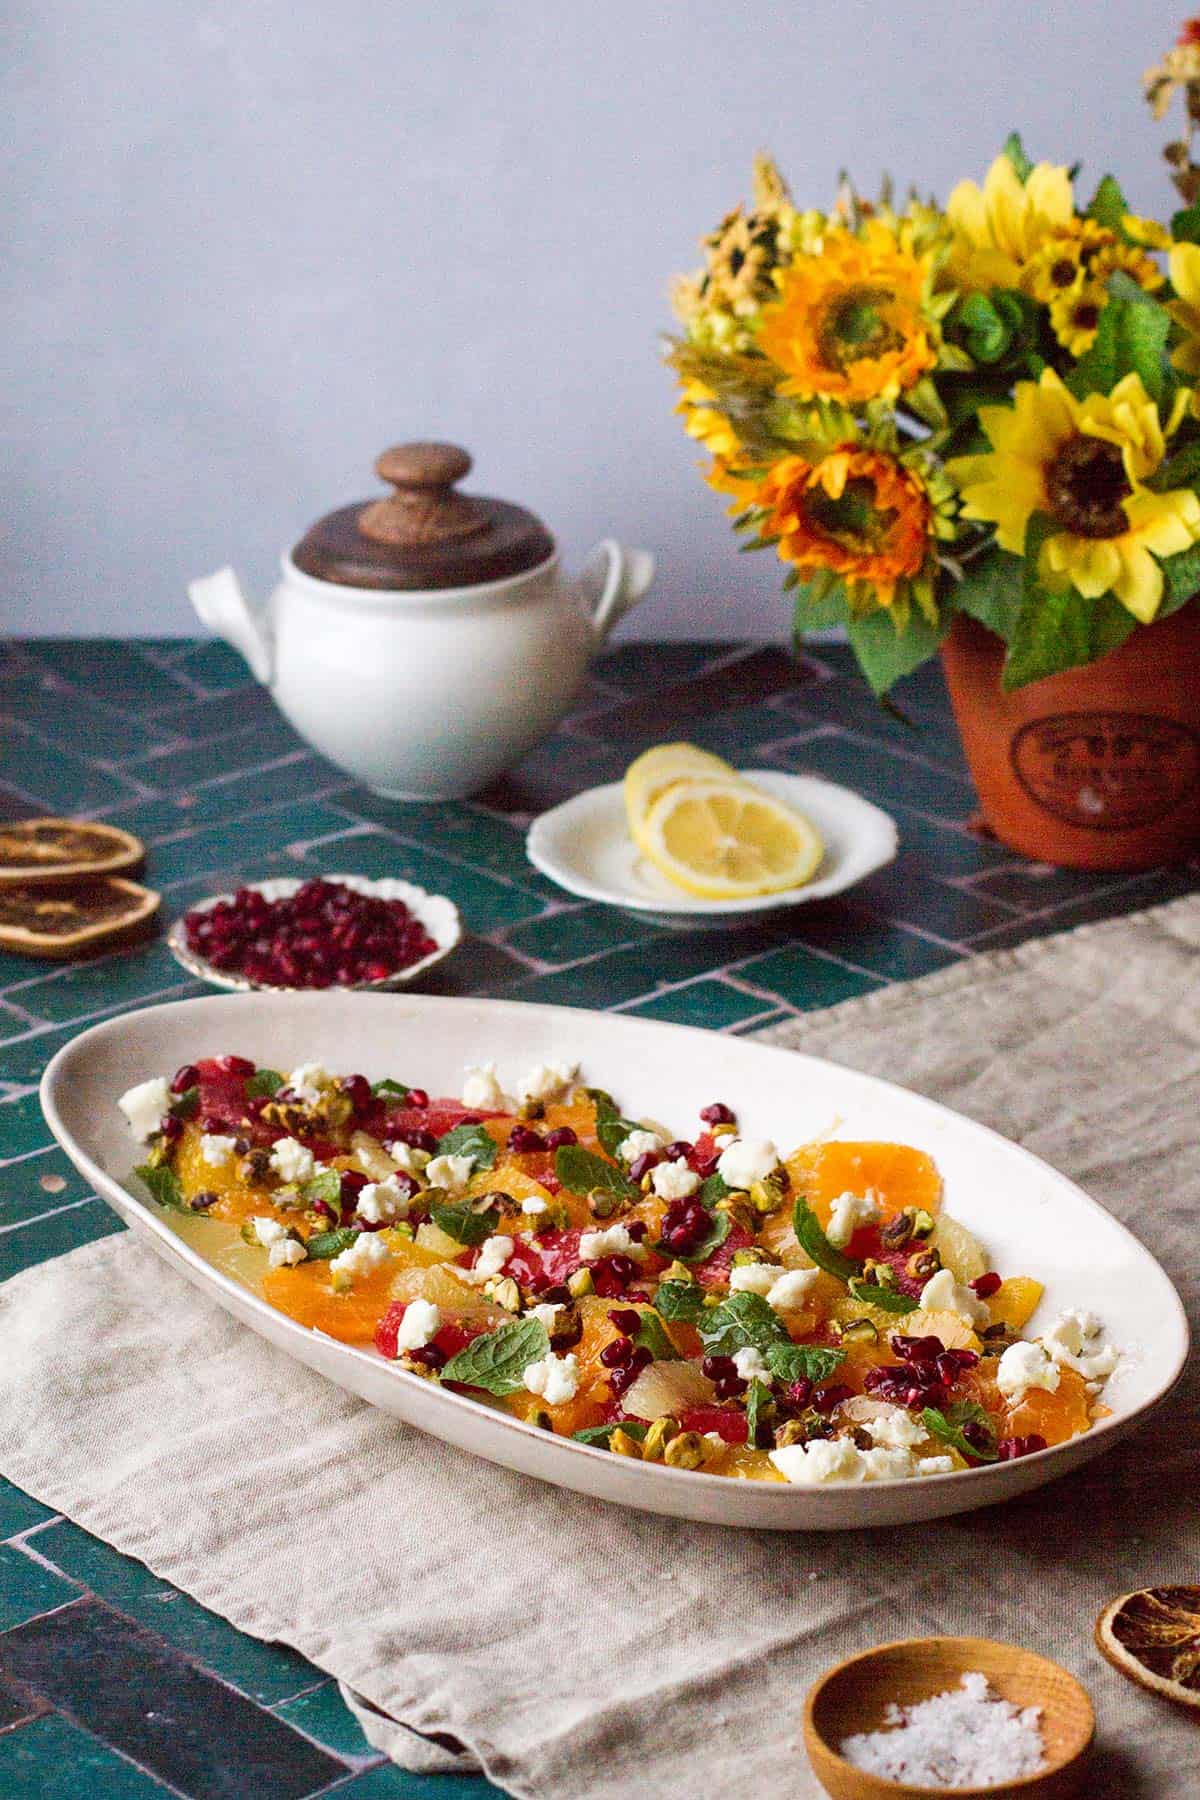 The citrus salad in one layer on a long plate, sunflowers in the background.